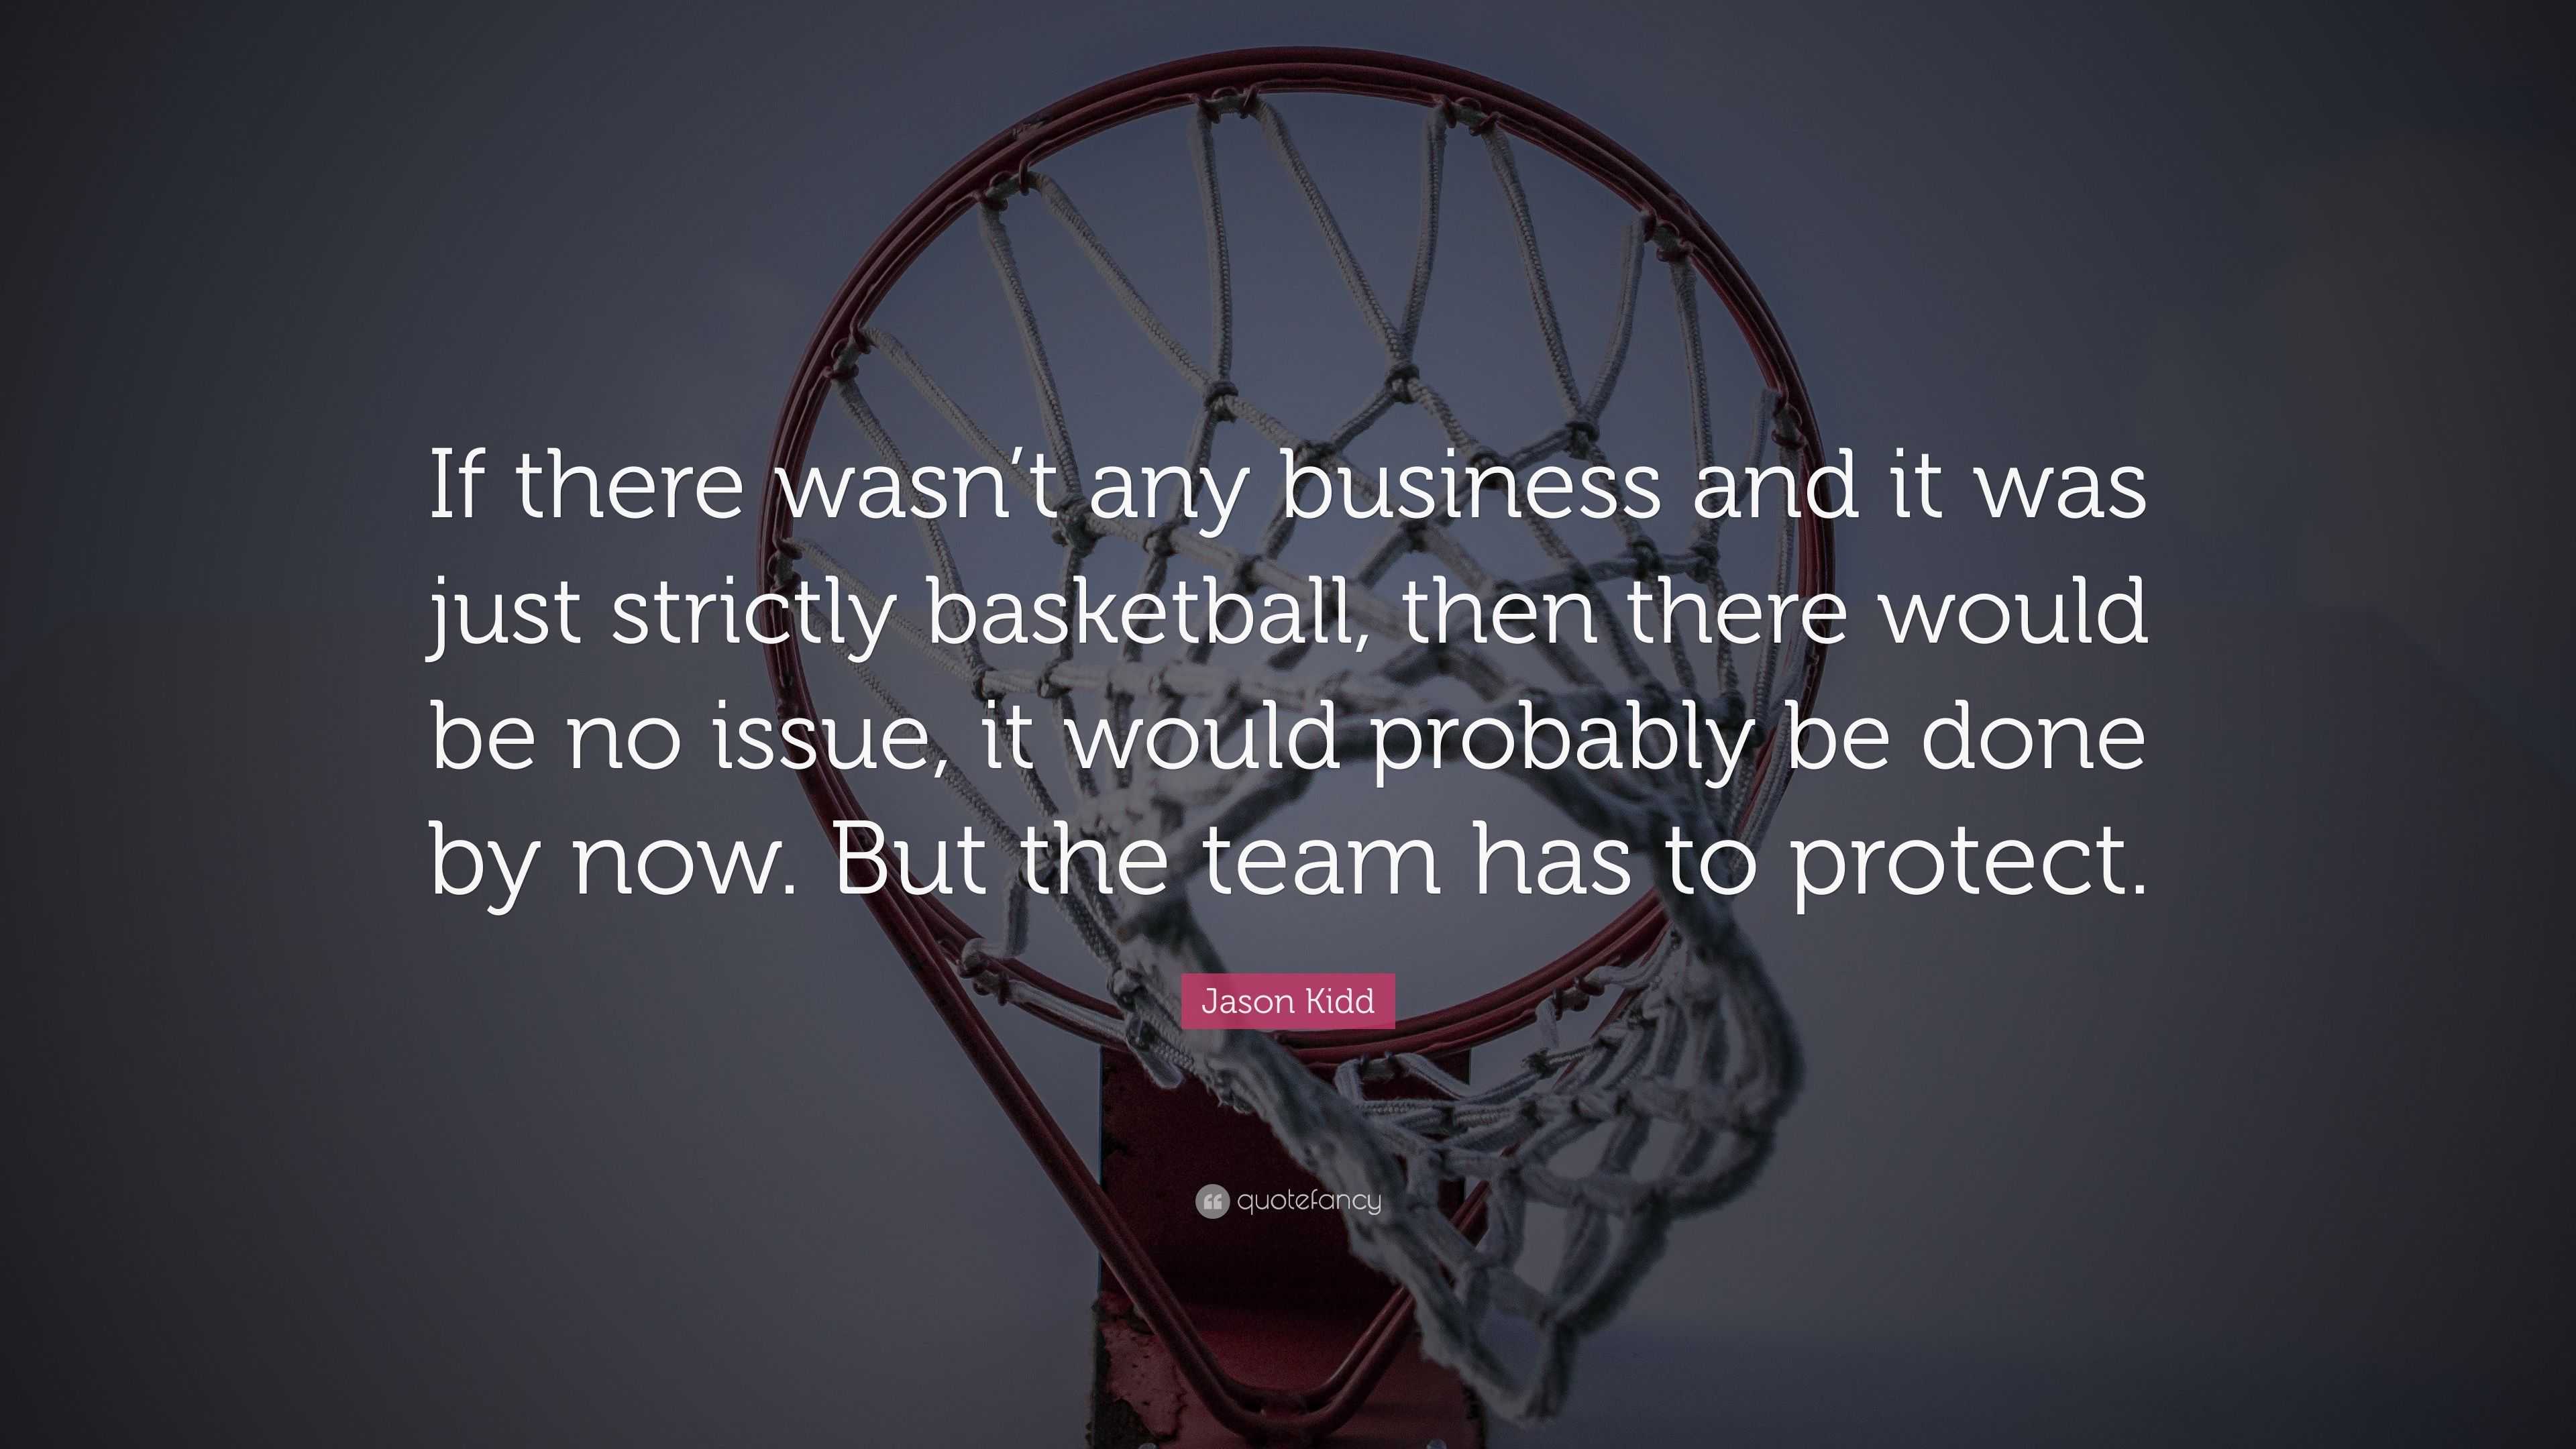 Jason Kidd Quote: “If there wasn’t any business and it was just ...